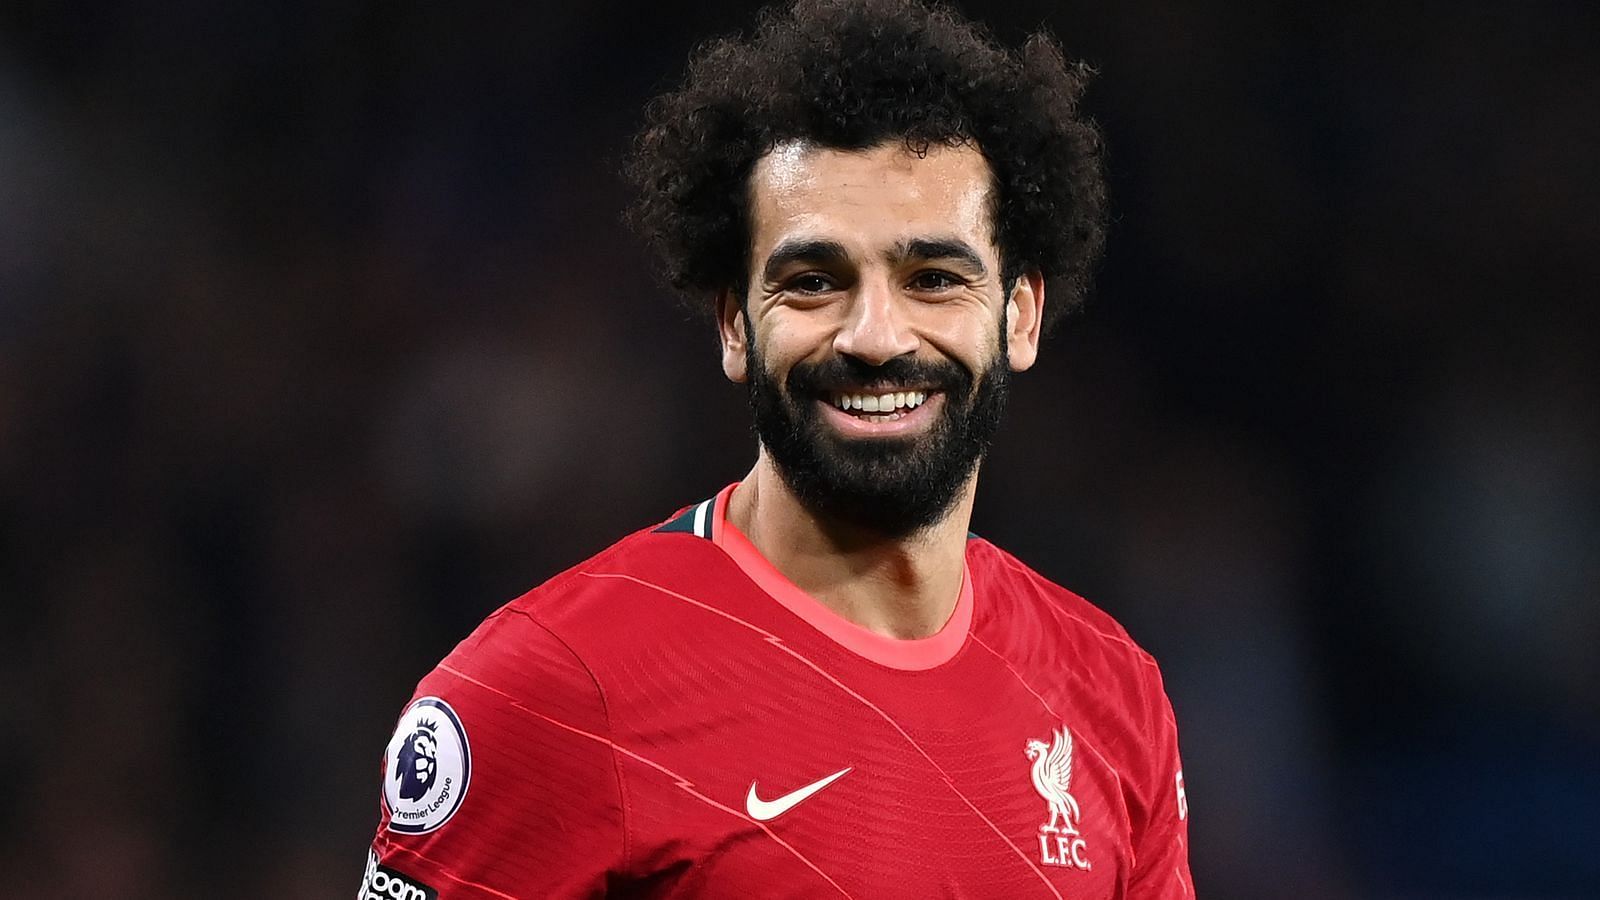 Salah was again the stand-out player for Liverpool